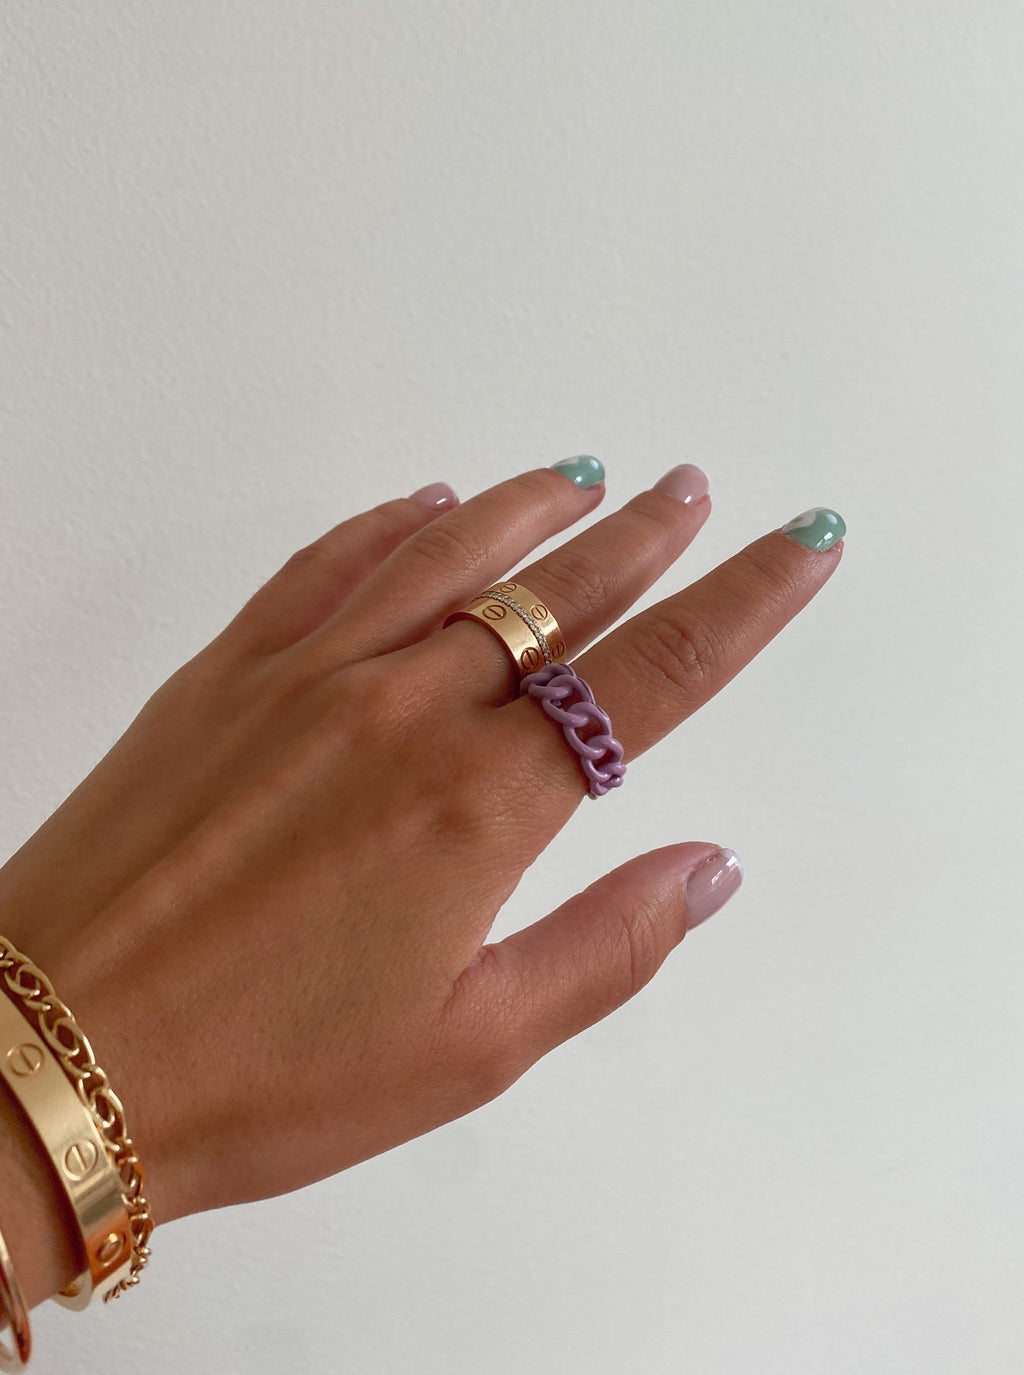 linked up ring in purple